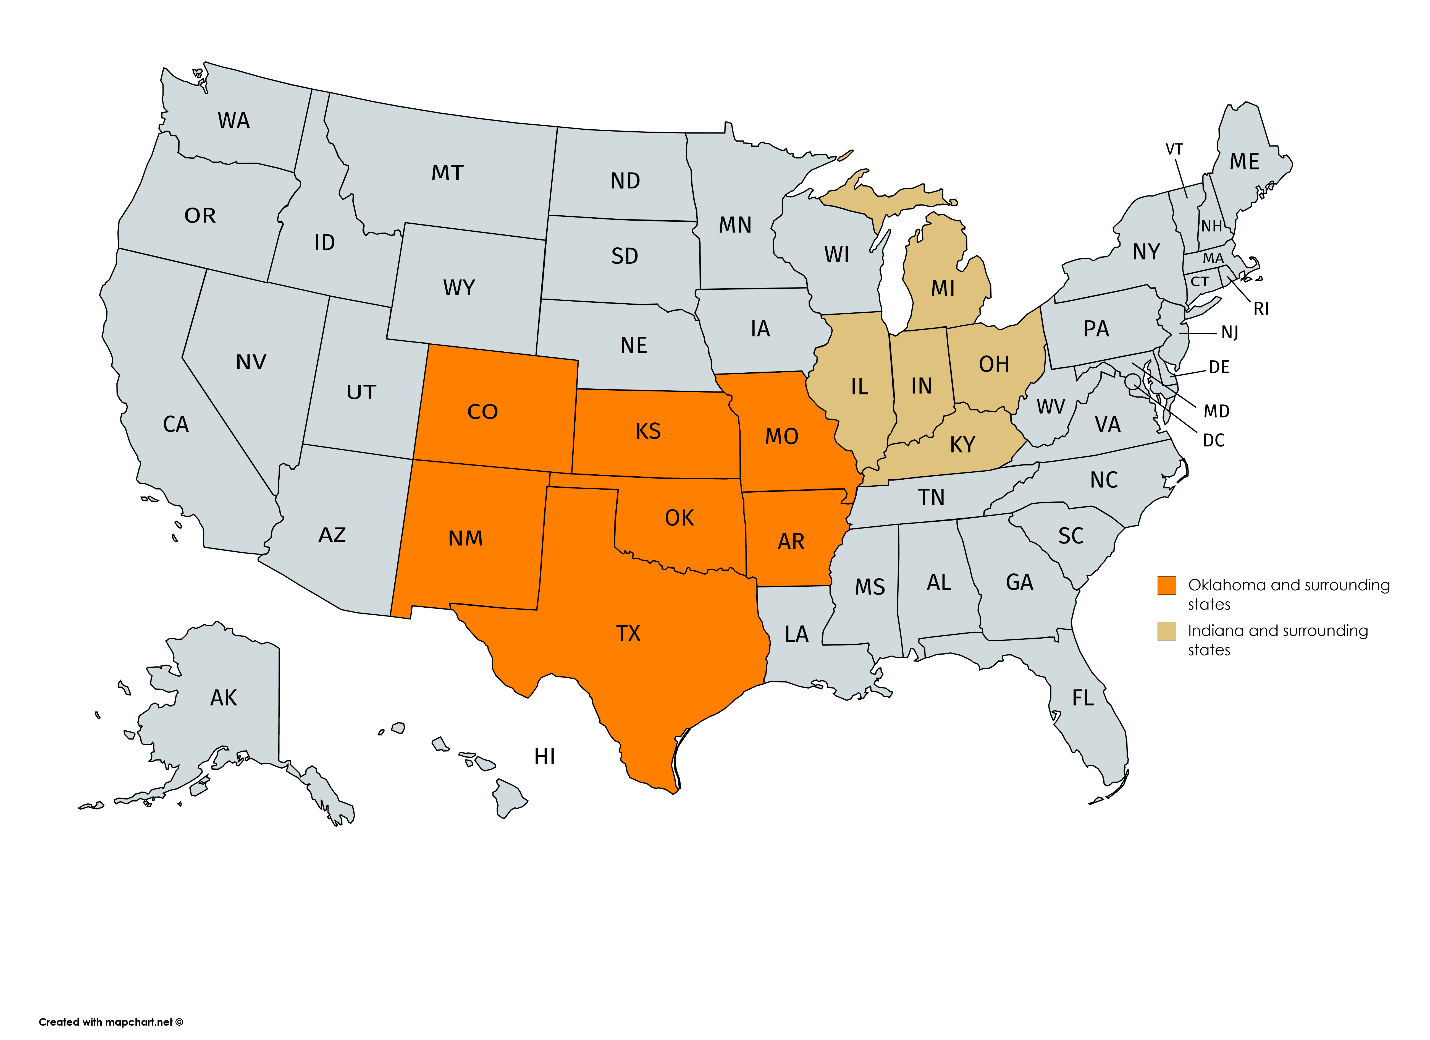 Figure 1. Indiana and surrounding states and Oklahoma and surrounding states.